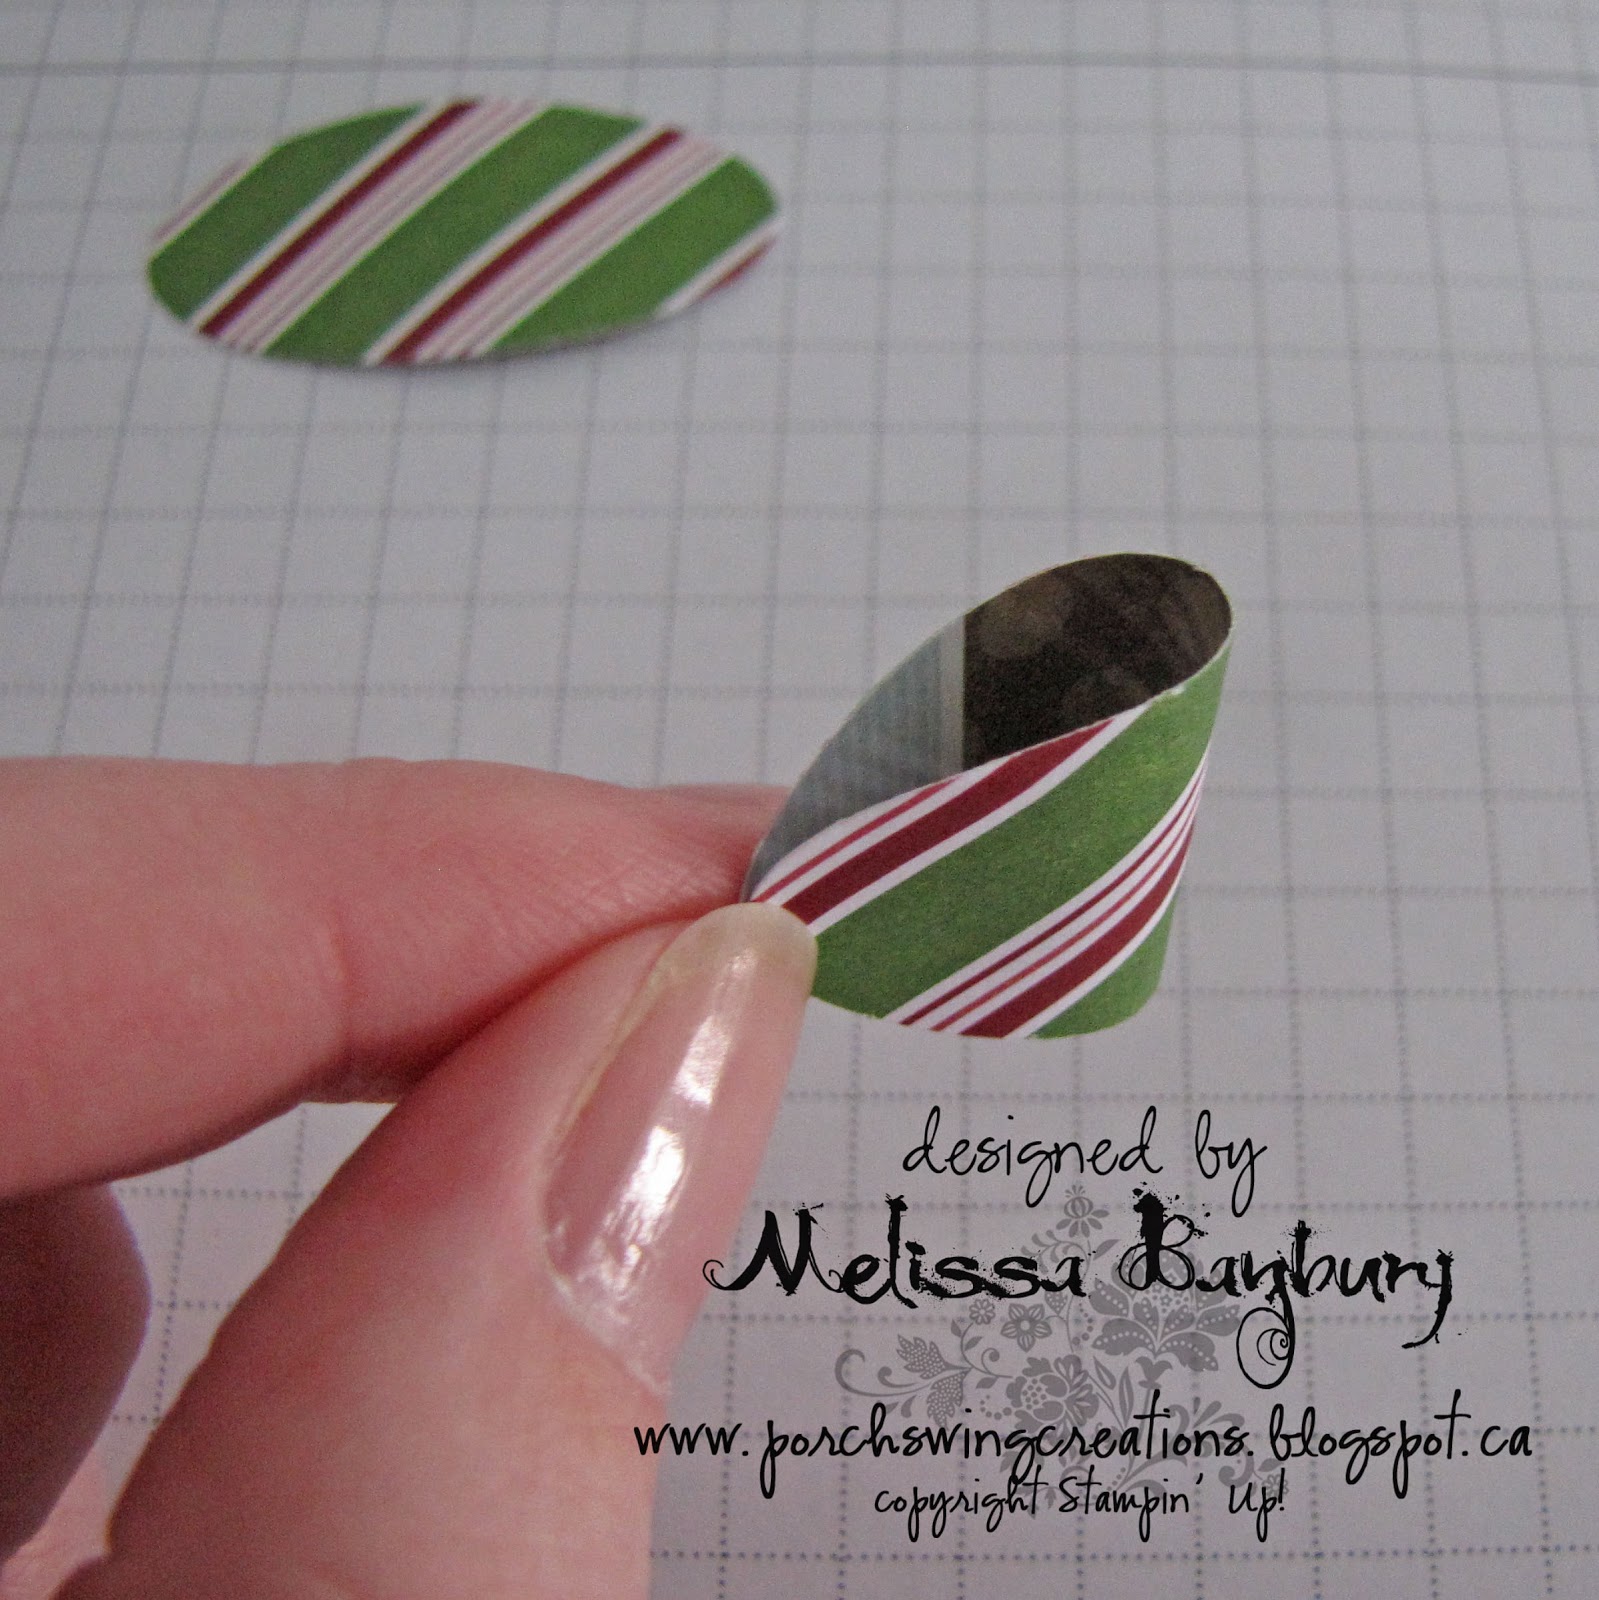 Using the handle of a stylus tool or pen, gently wrap each of the oval ...